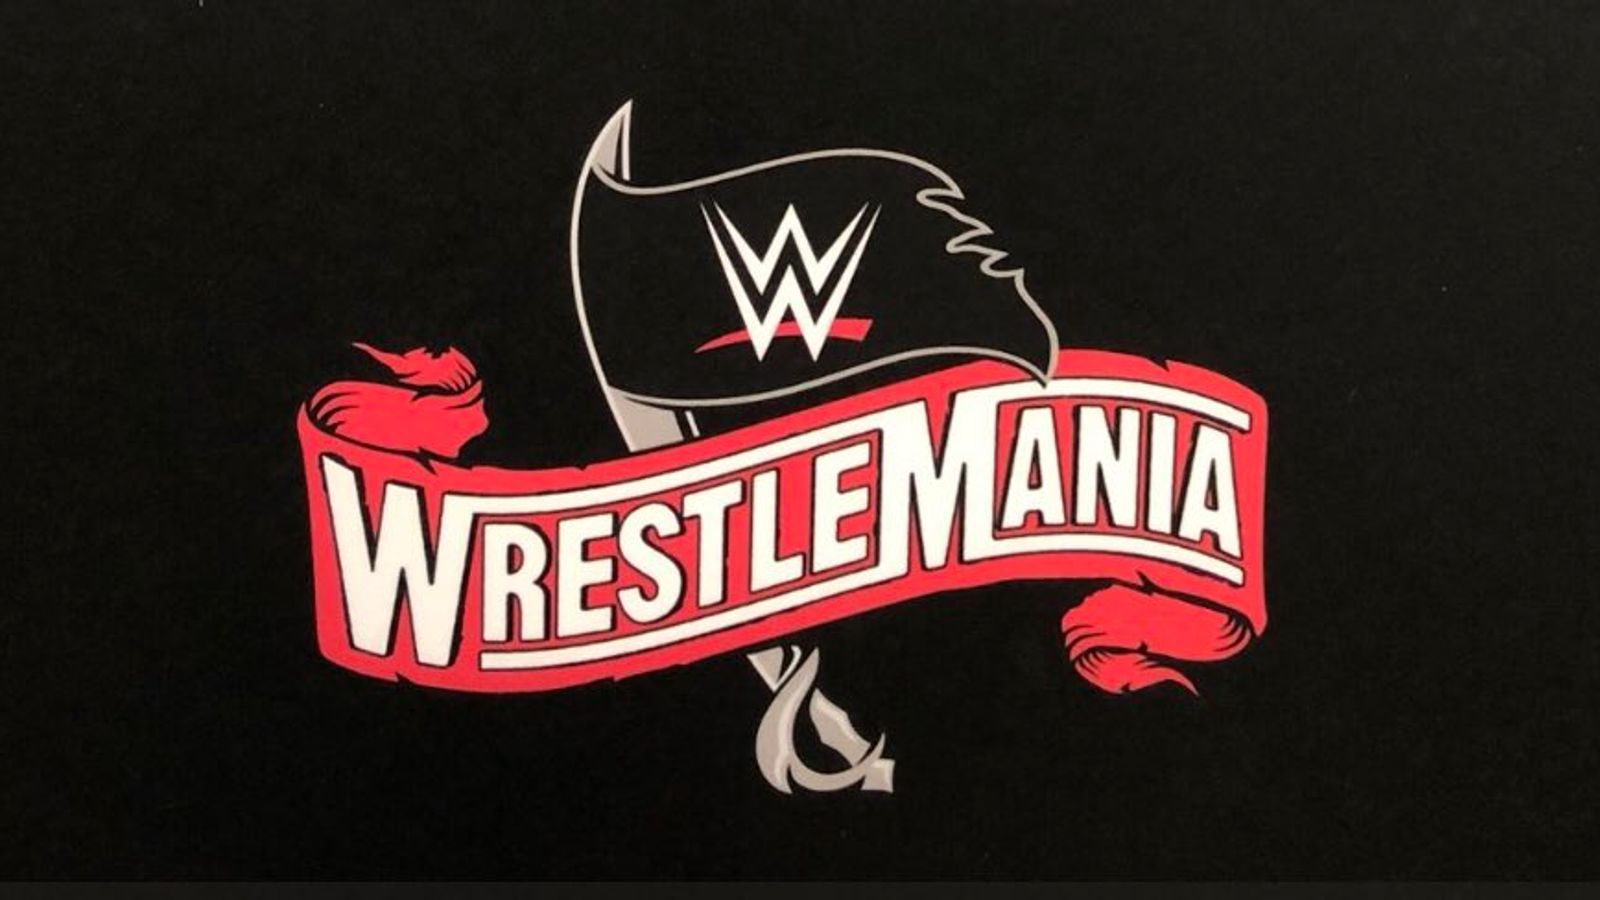 Tampa to host WrestleMania 36, WWE confirms | WWE News ...